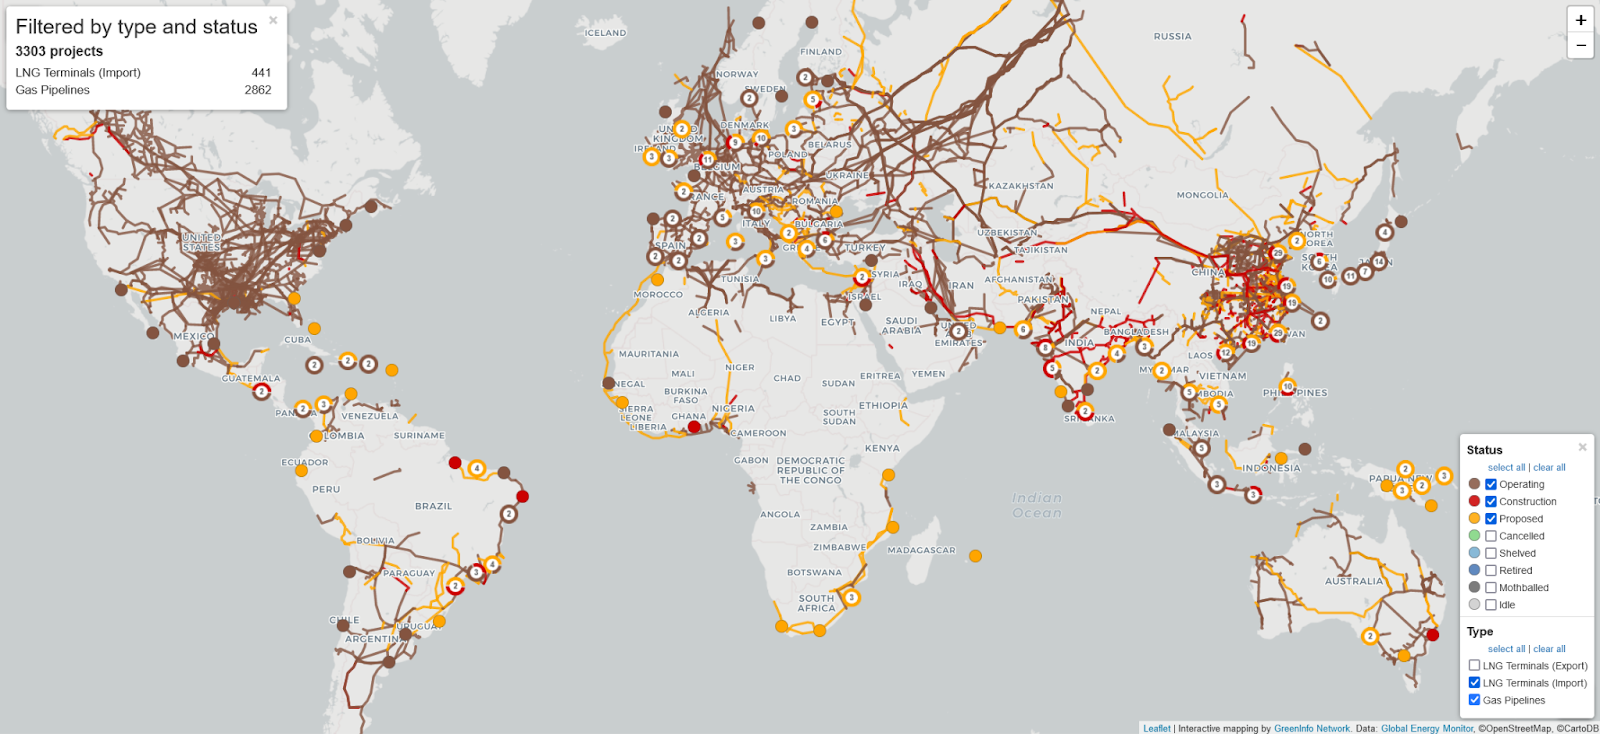 LNG Import Terminals and Gas Pipelines, Source: Global Energy Monitor